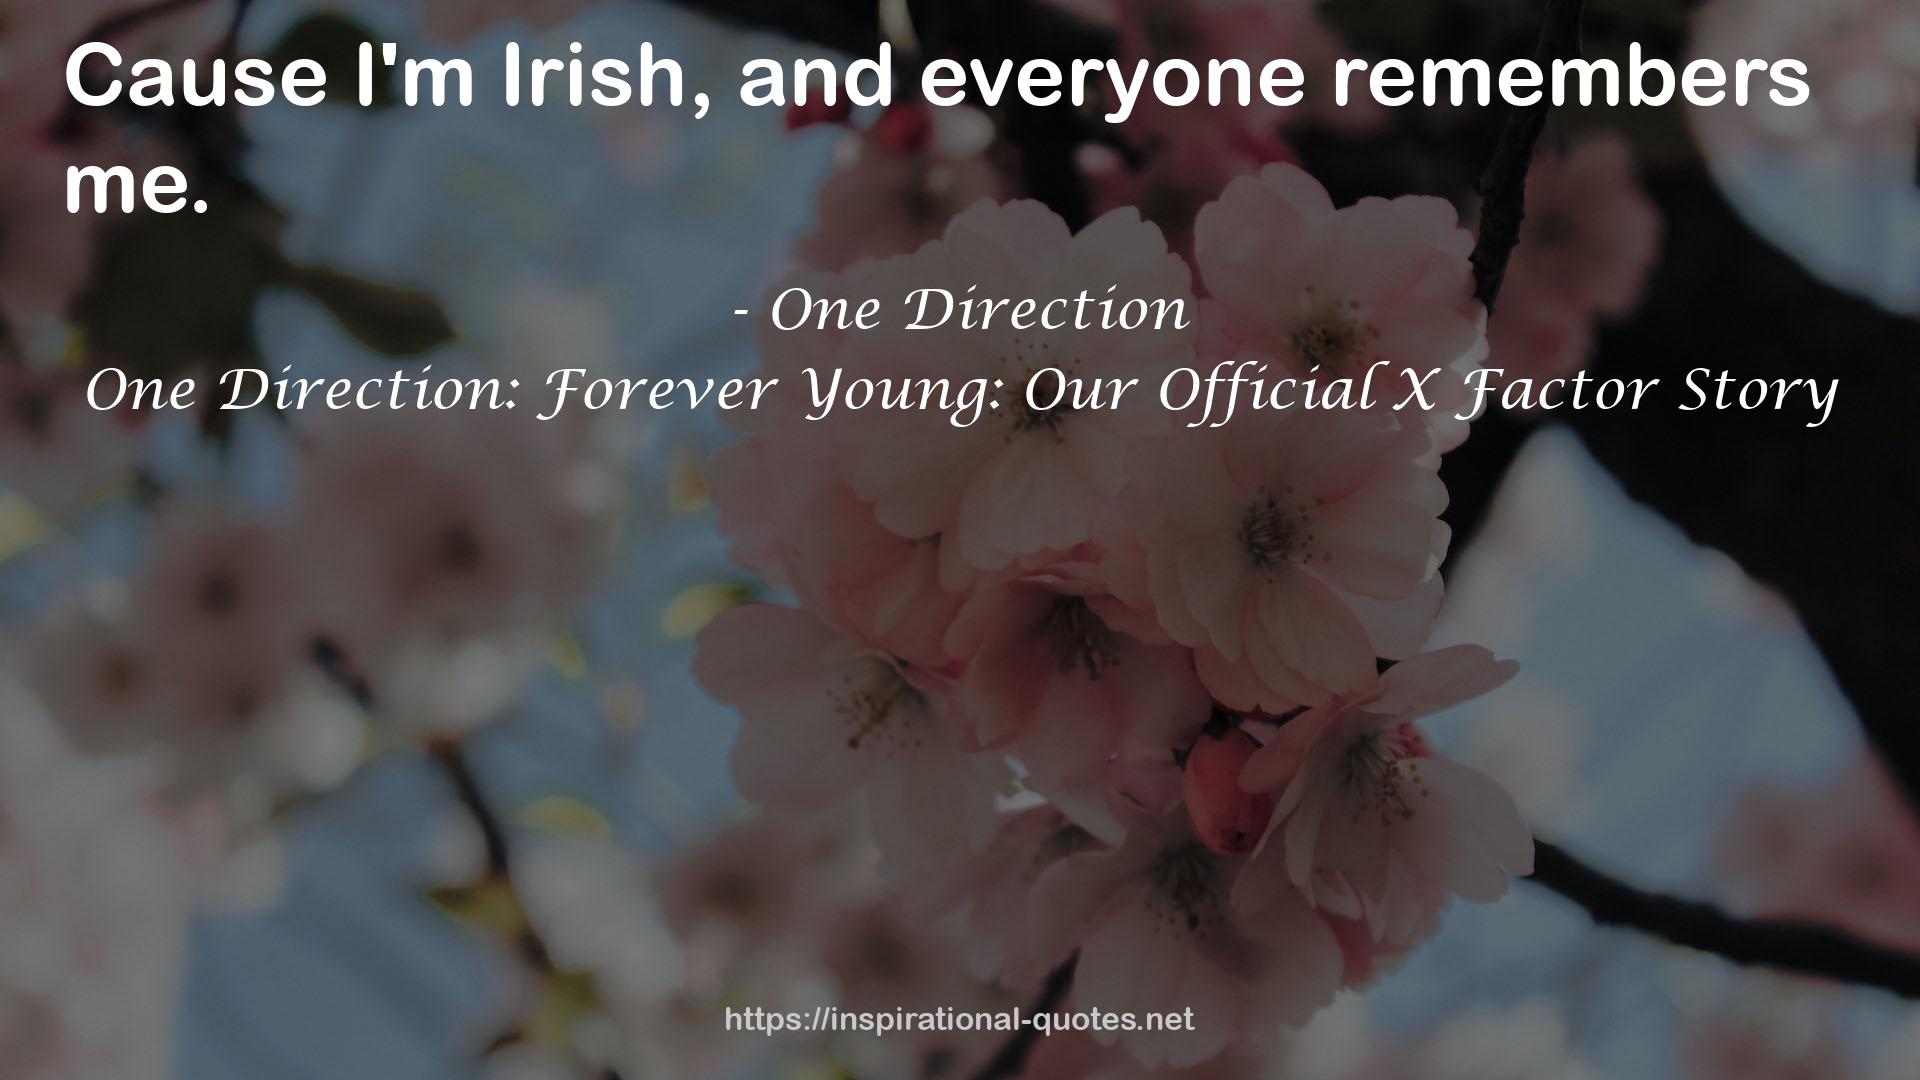 One Direction: Forever Young: Our Official X Factor Story QUOTES